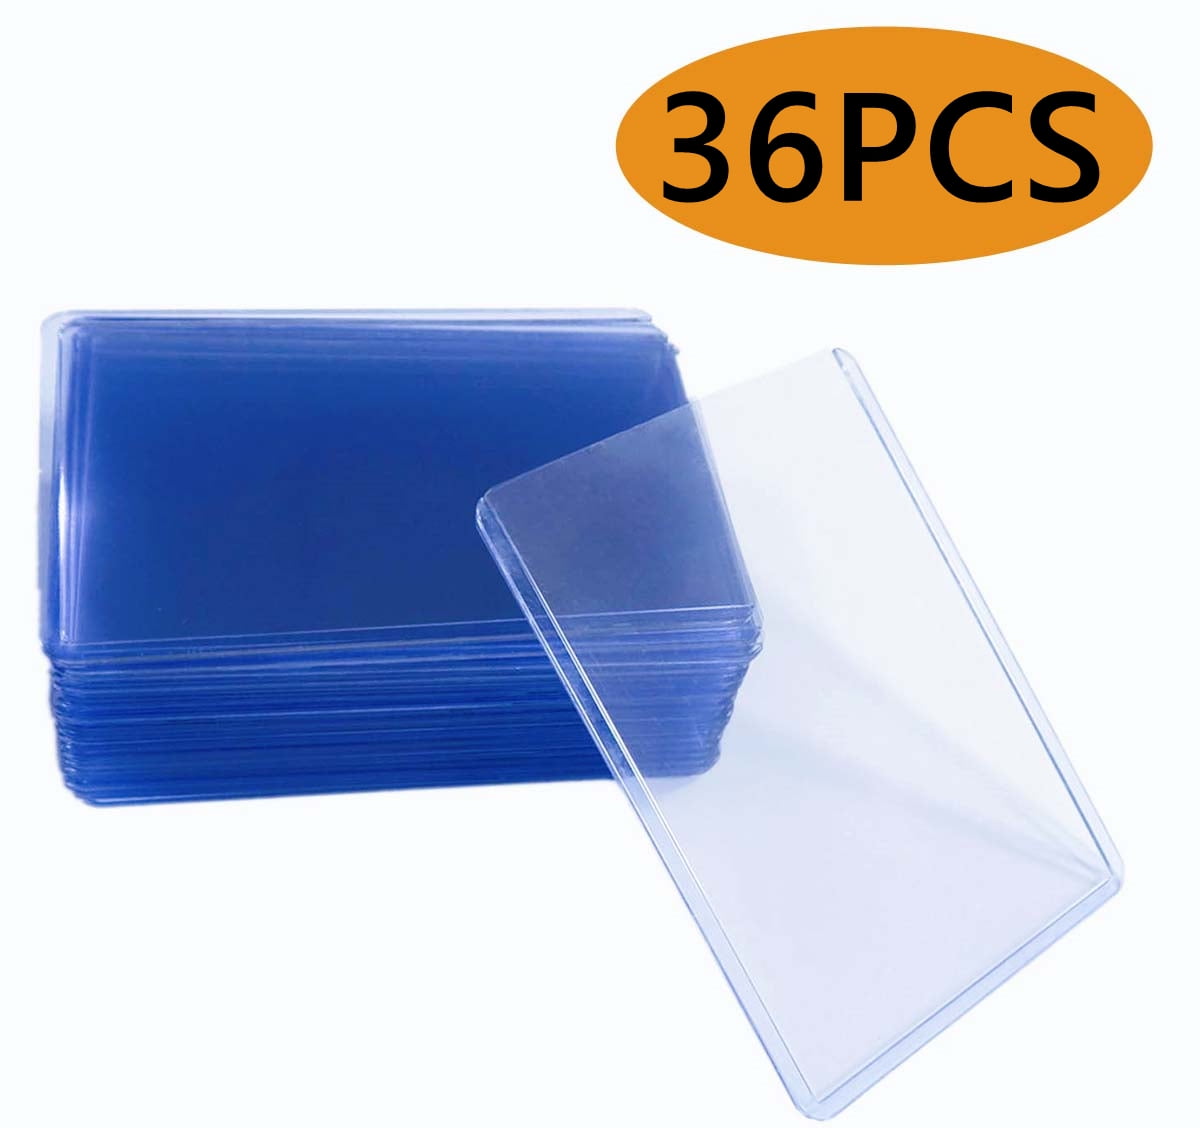 Card Sleeves for Trading Cards Hard Plastic Card Protector for Standard Cards, Sports Cards, Baseball Cards Toploaders 36pcs